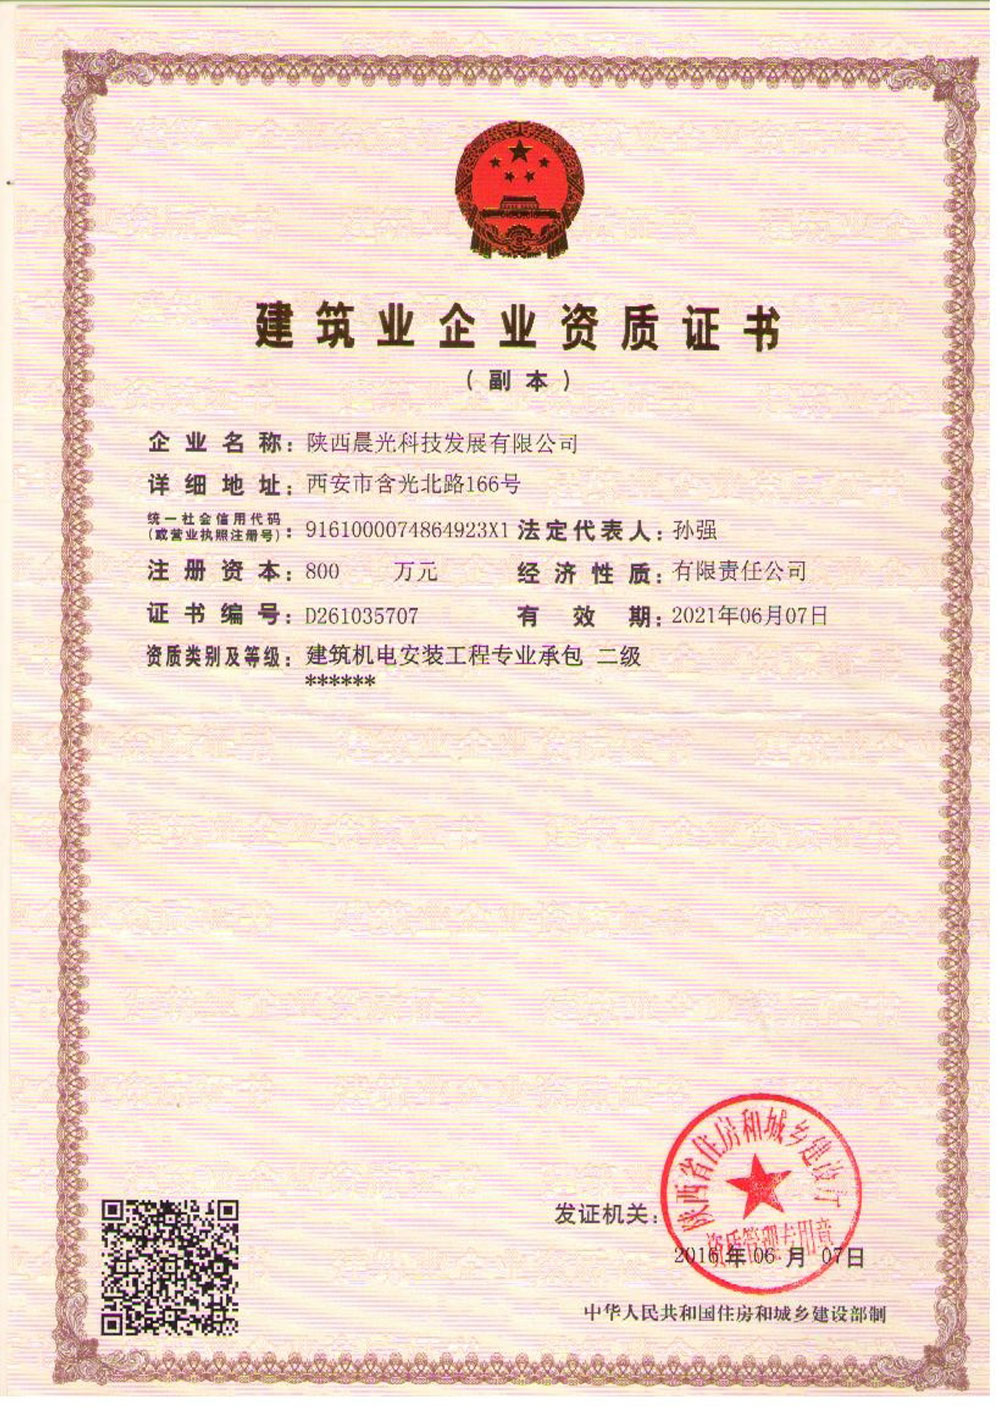 Business license1